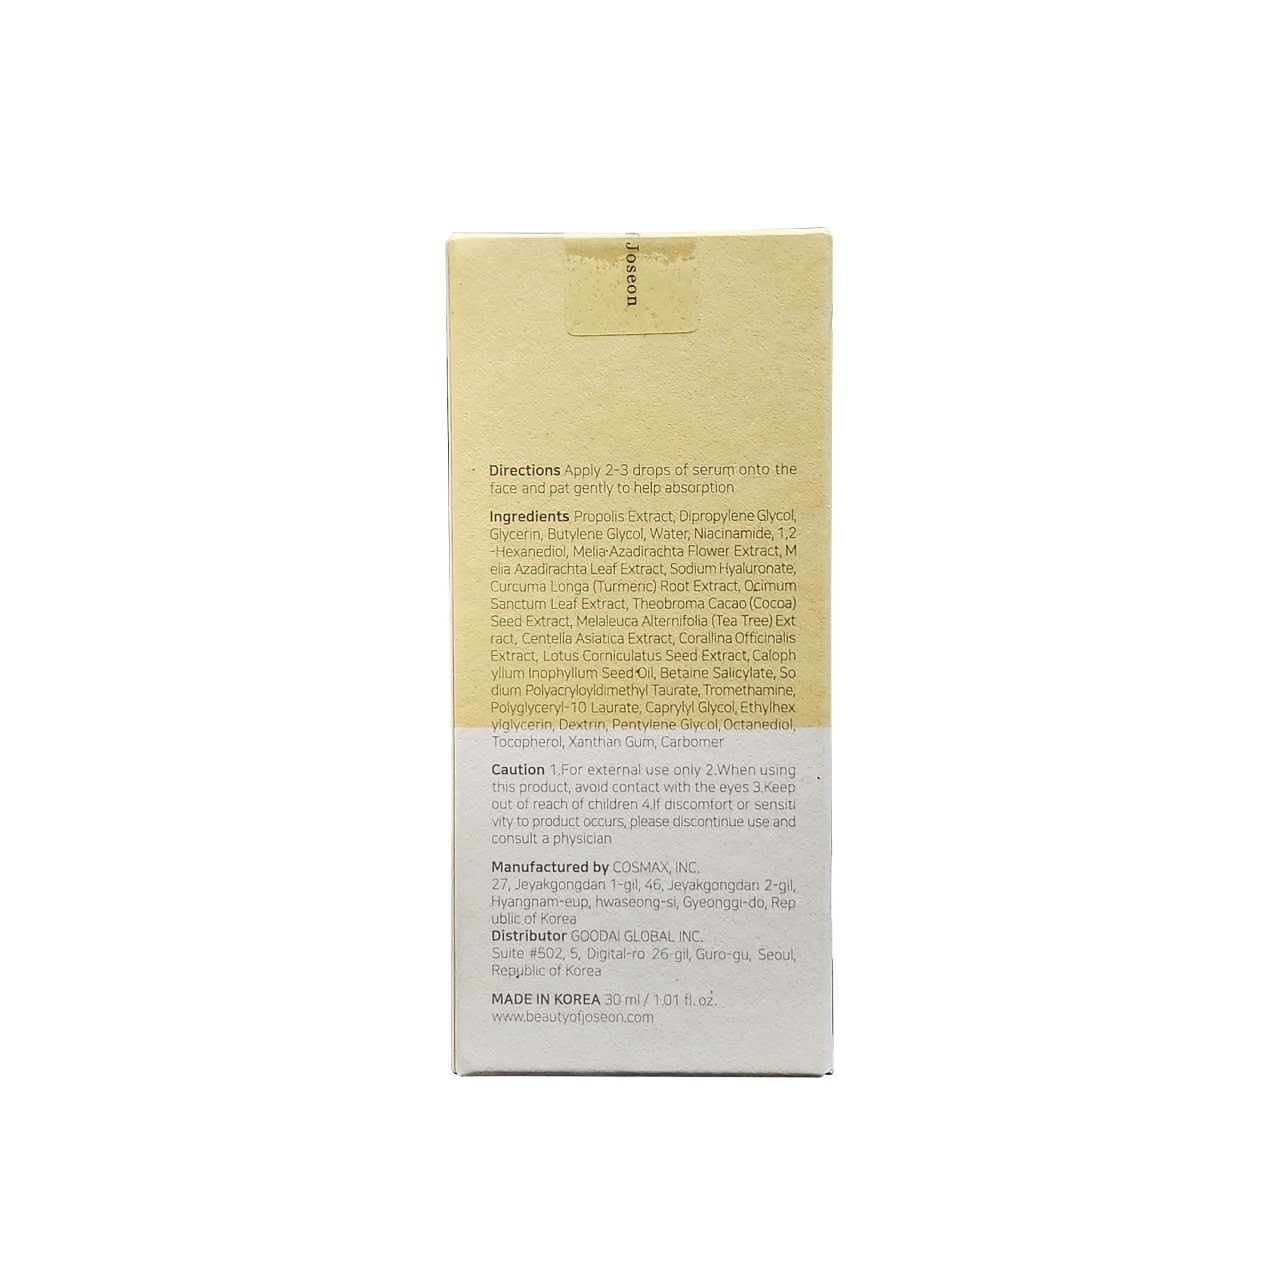 Directions, ingredients, cautions for Beauty of Joseon Glow Serum Propolis + Niacinamide (30 mL) in English